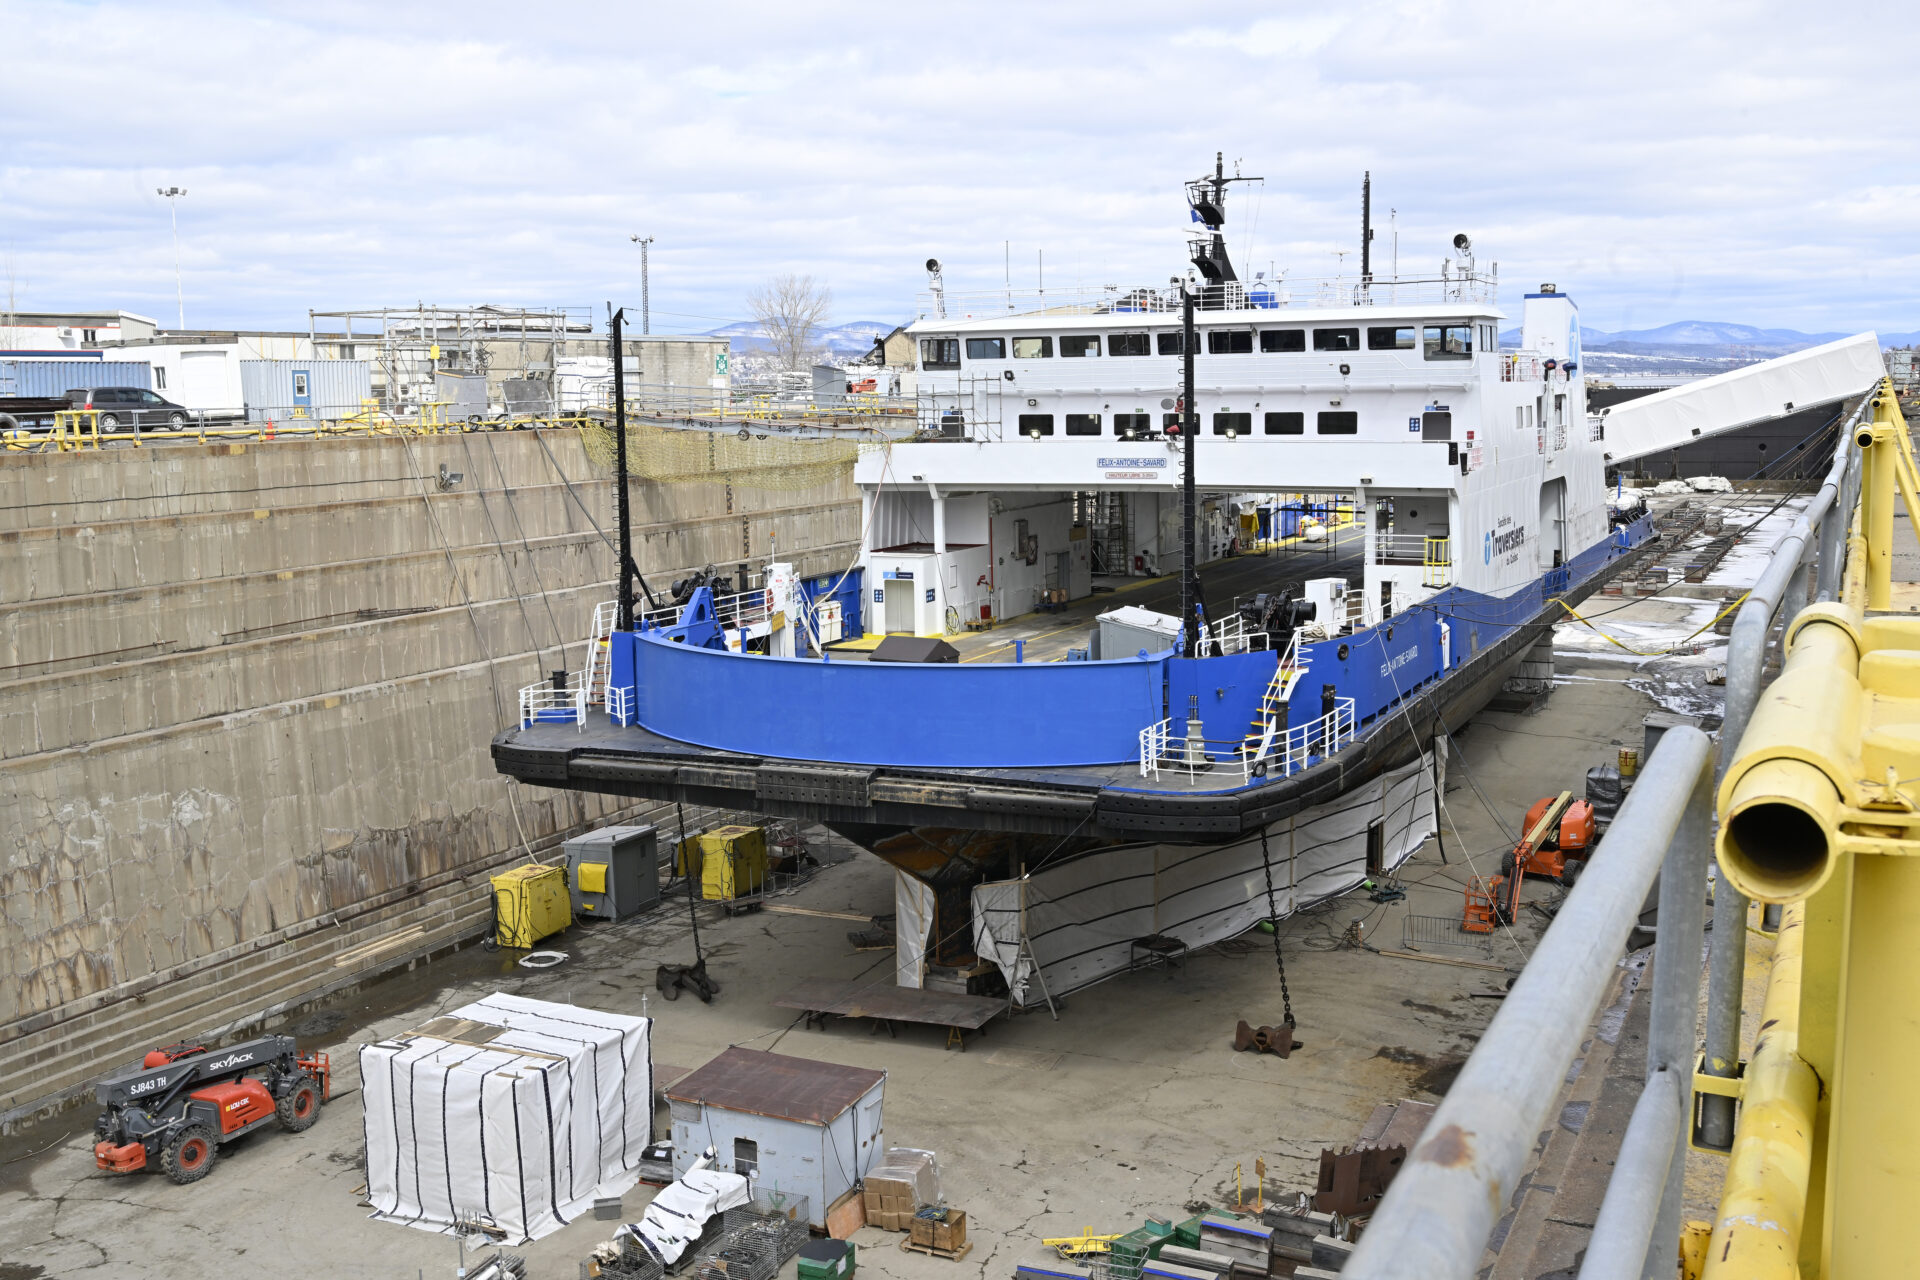 The ferry is long, wide and shallow, with a blue metal hull, a black bumper that runs its length at its waterline. It is sitting in a concrete enclosure that has been emptied of water It is surrounded by small machinery and supplies.